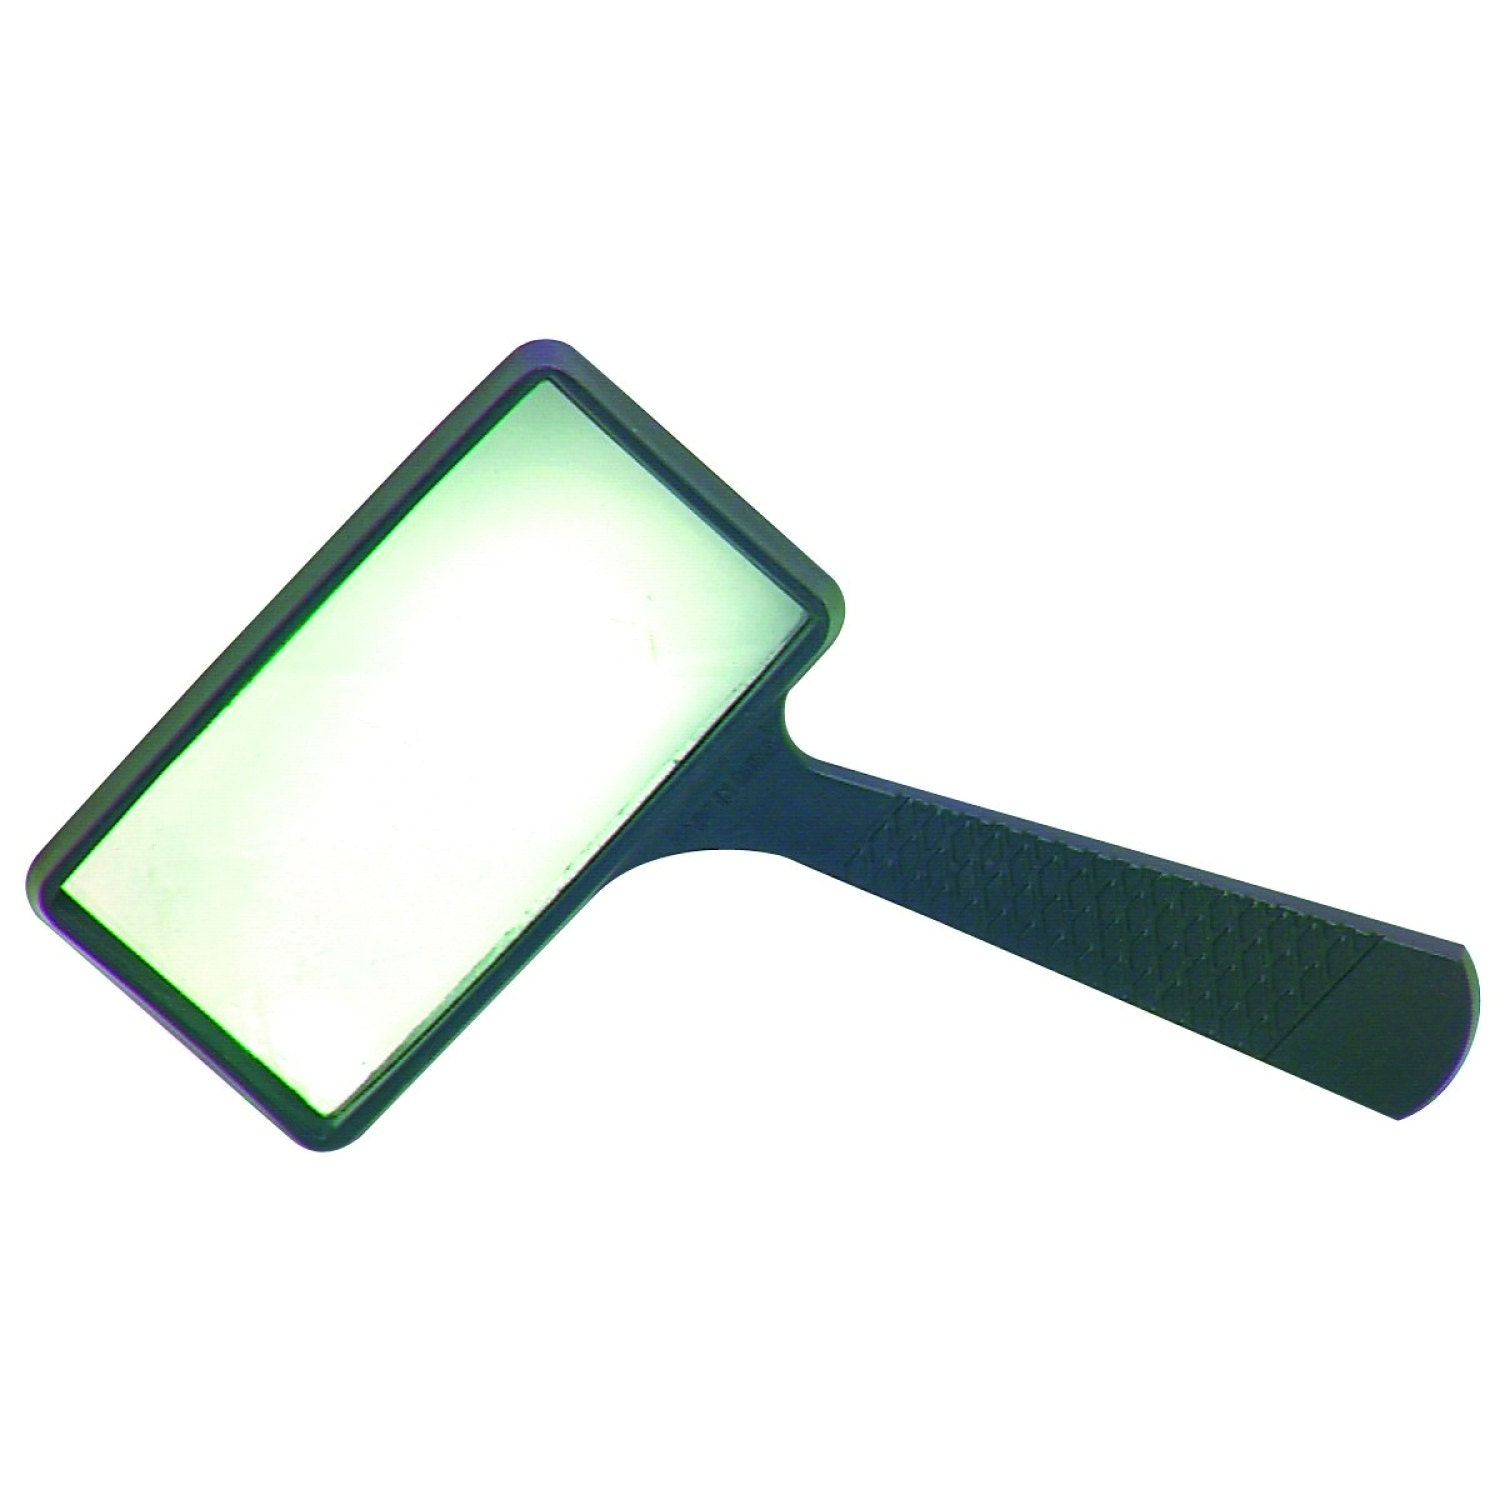 VISION AID 30X Hands-free Magnifying Glass 21 LED Lights Magnifier